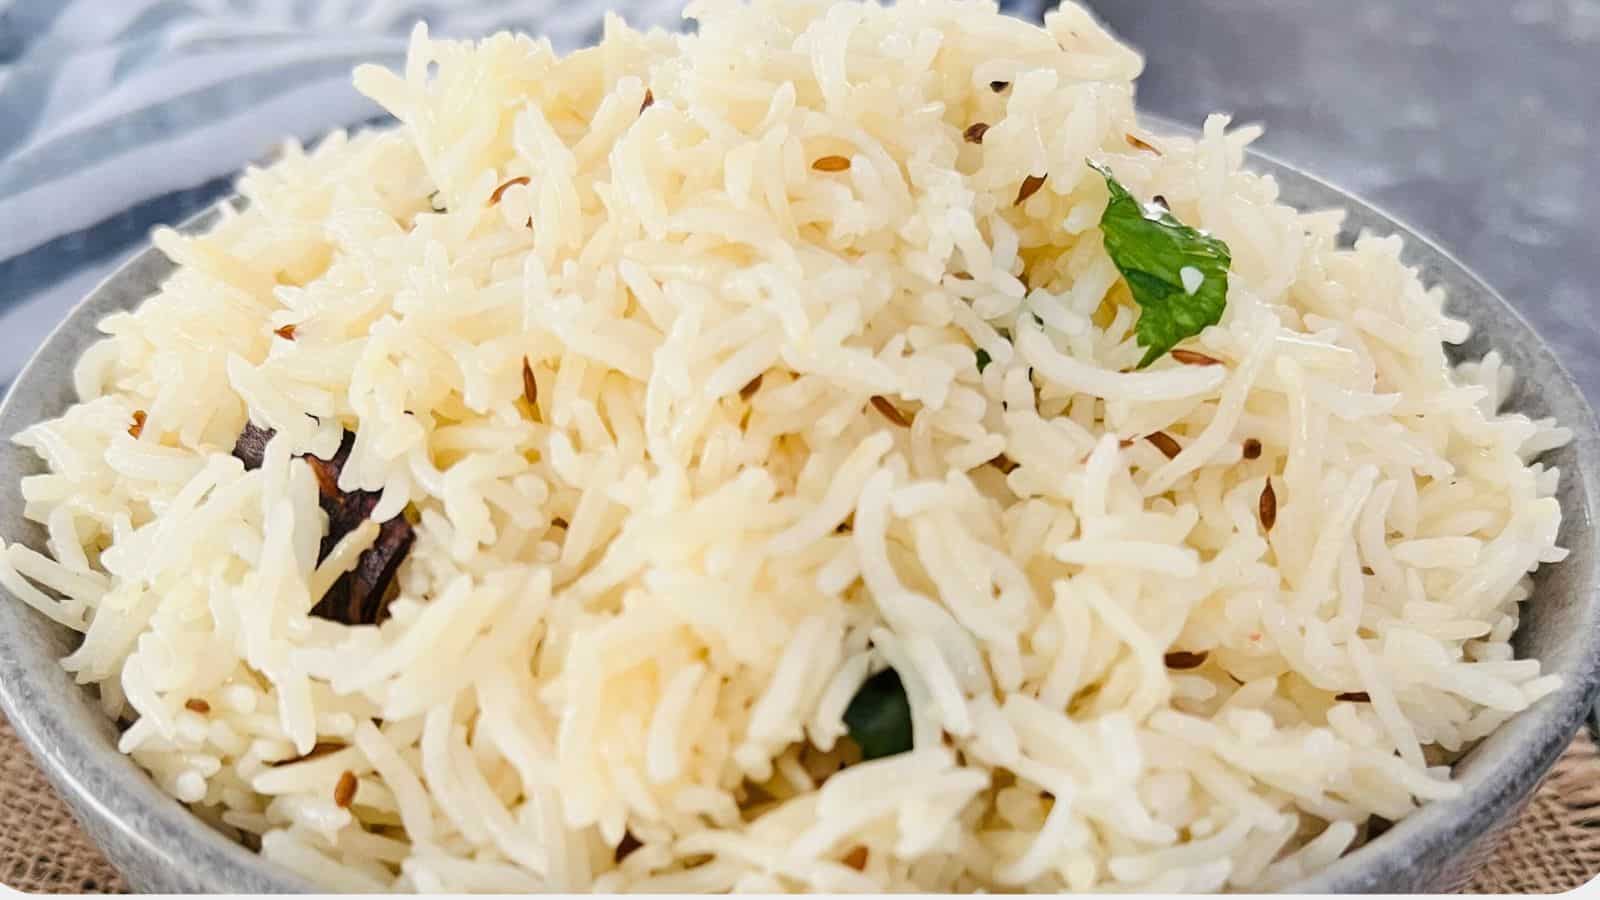 A bowl of cooked Jeera Rice, garnished, presented on a textured grey background.